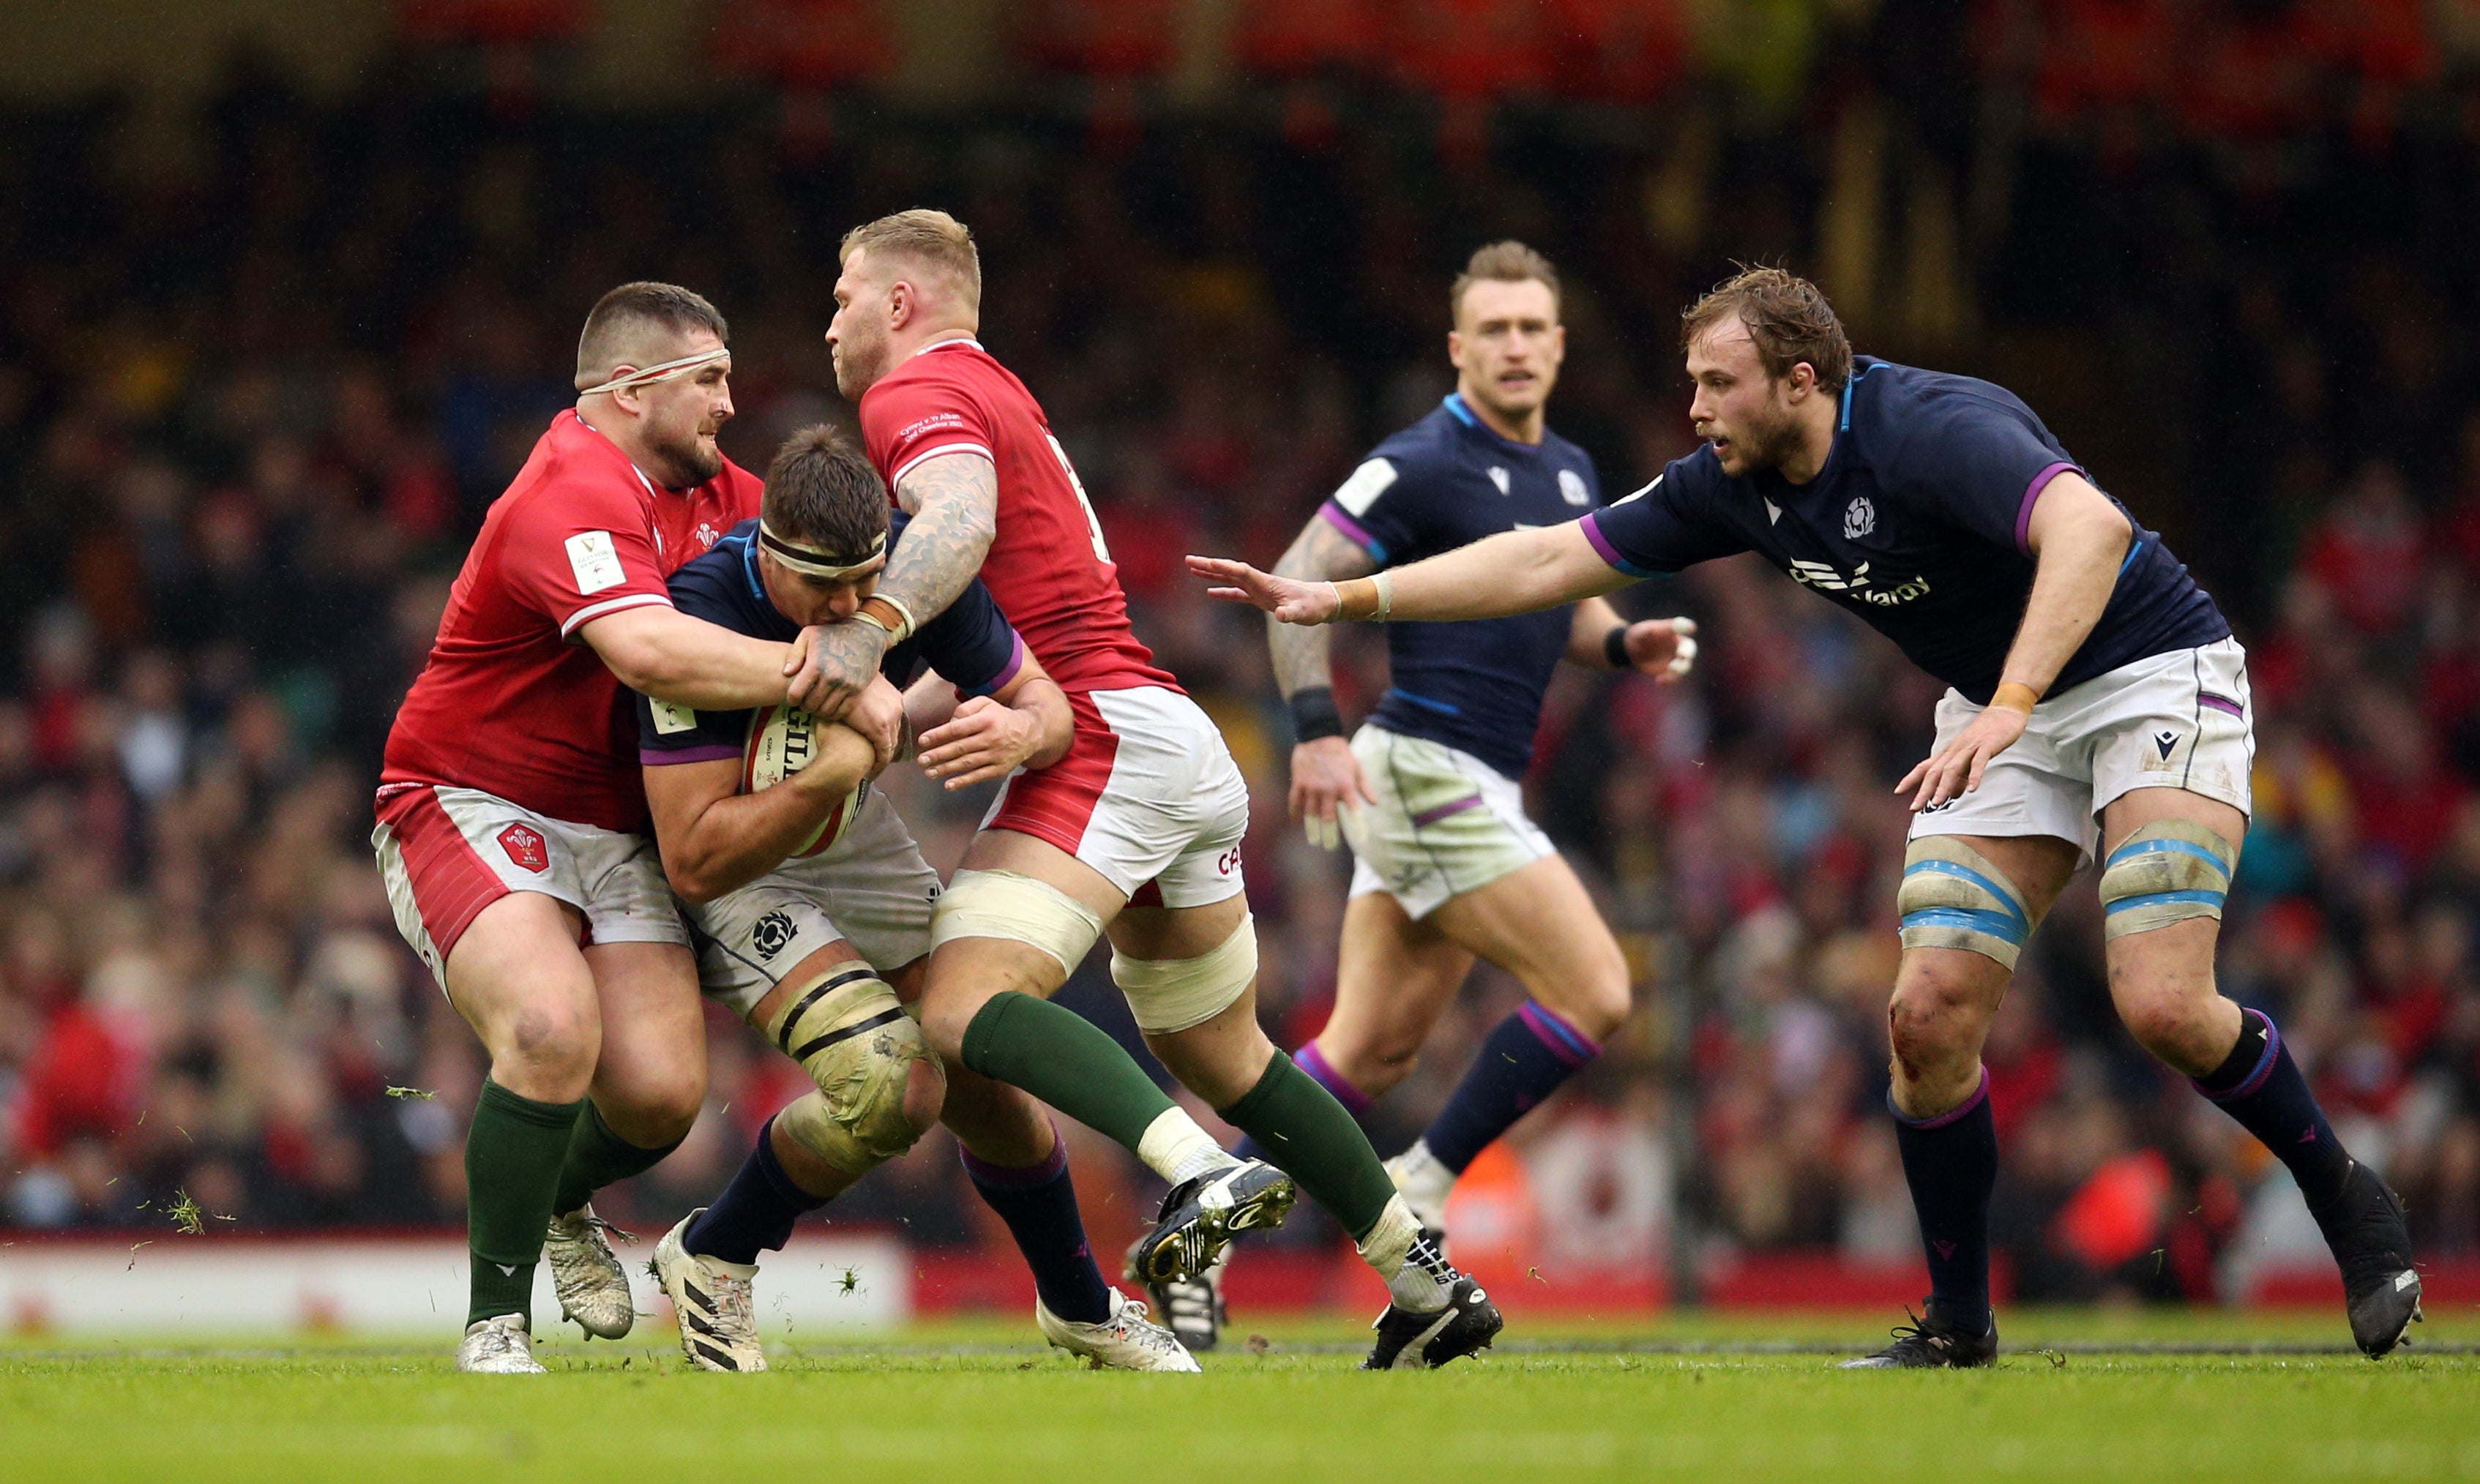 Sam Skinner was in the thick of it in Wales (Nigel French/PA)